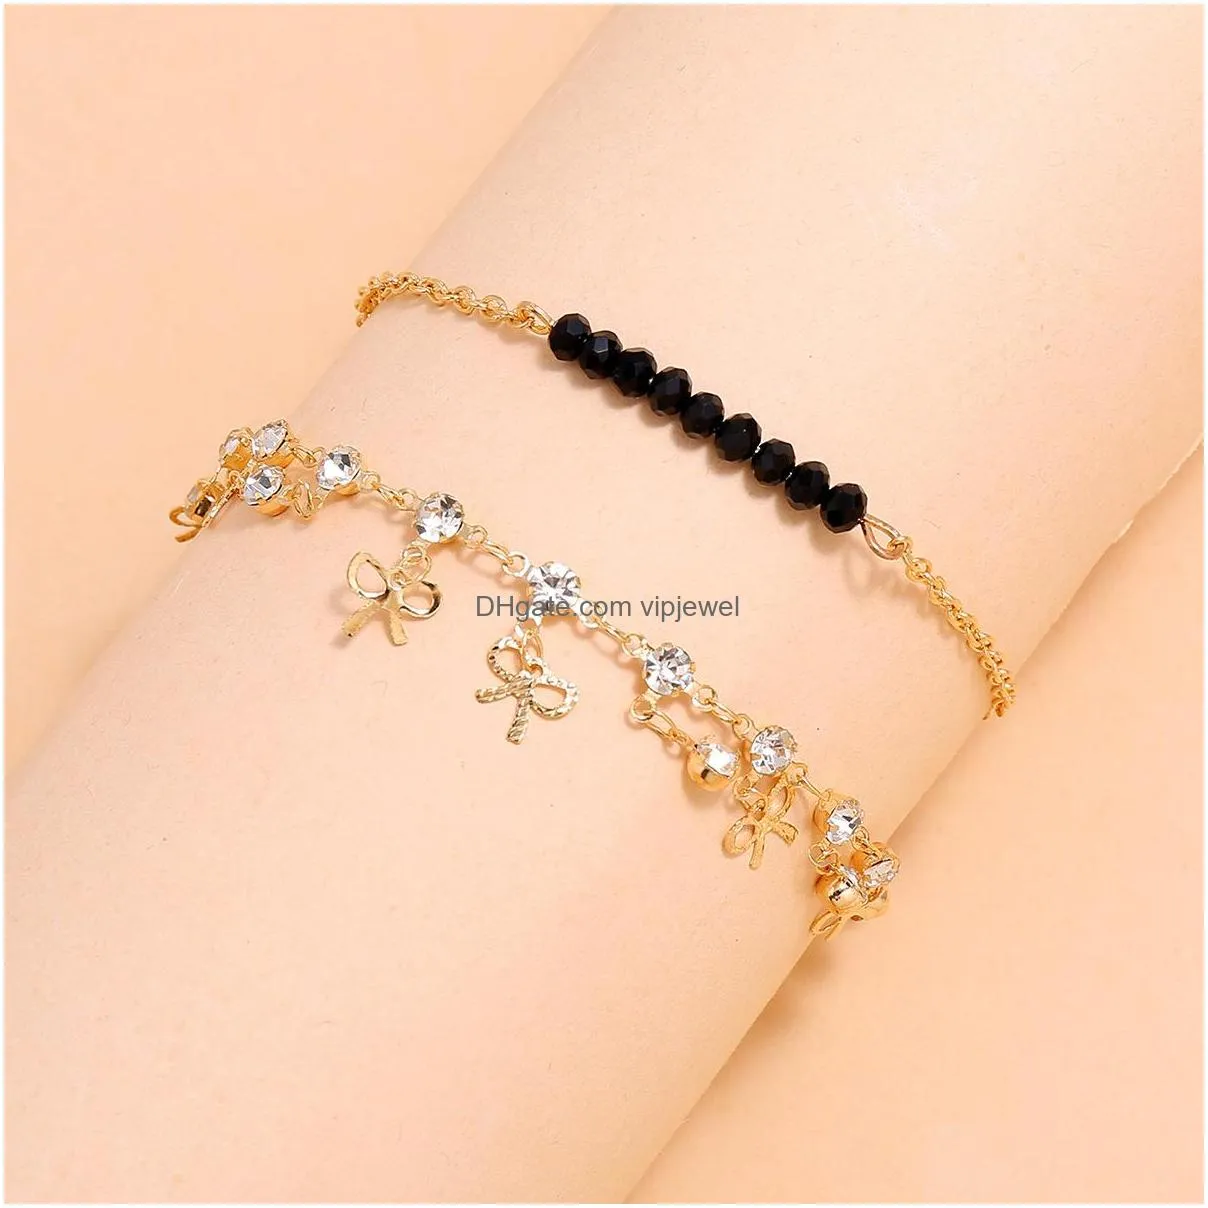 fashion jewelry beads handmade string black beads bowknot tassels chain anklet 2pcs/set womens anklets